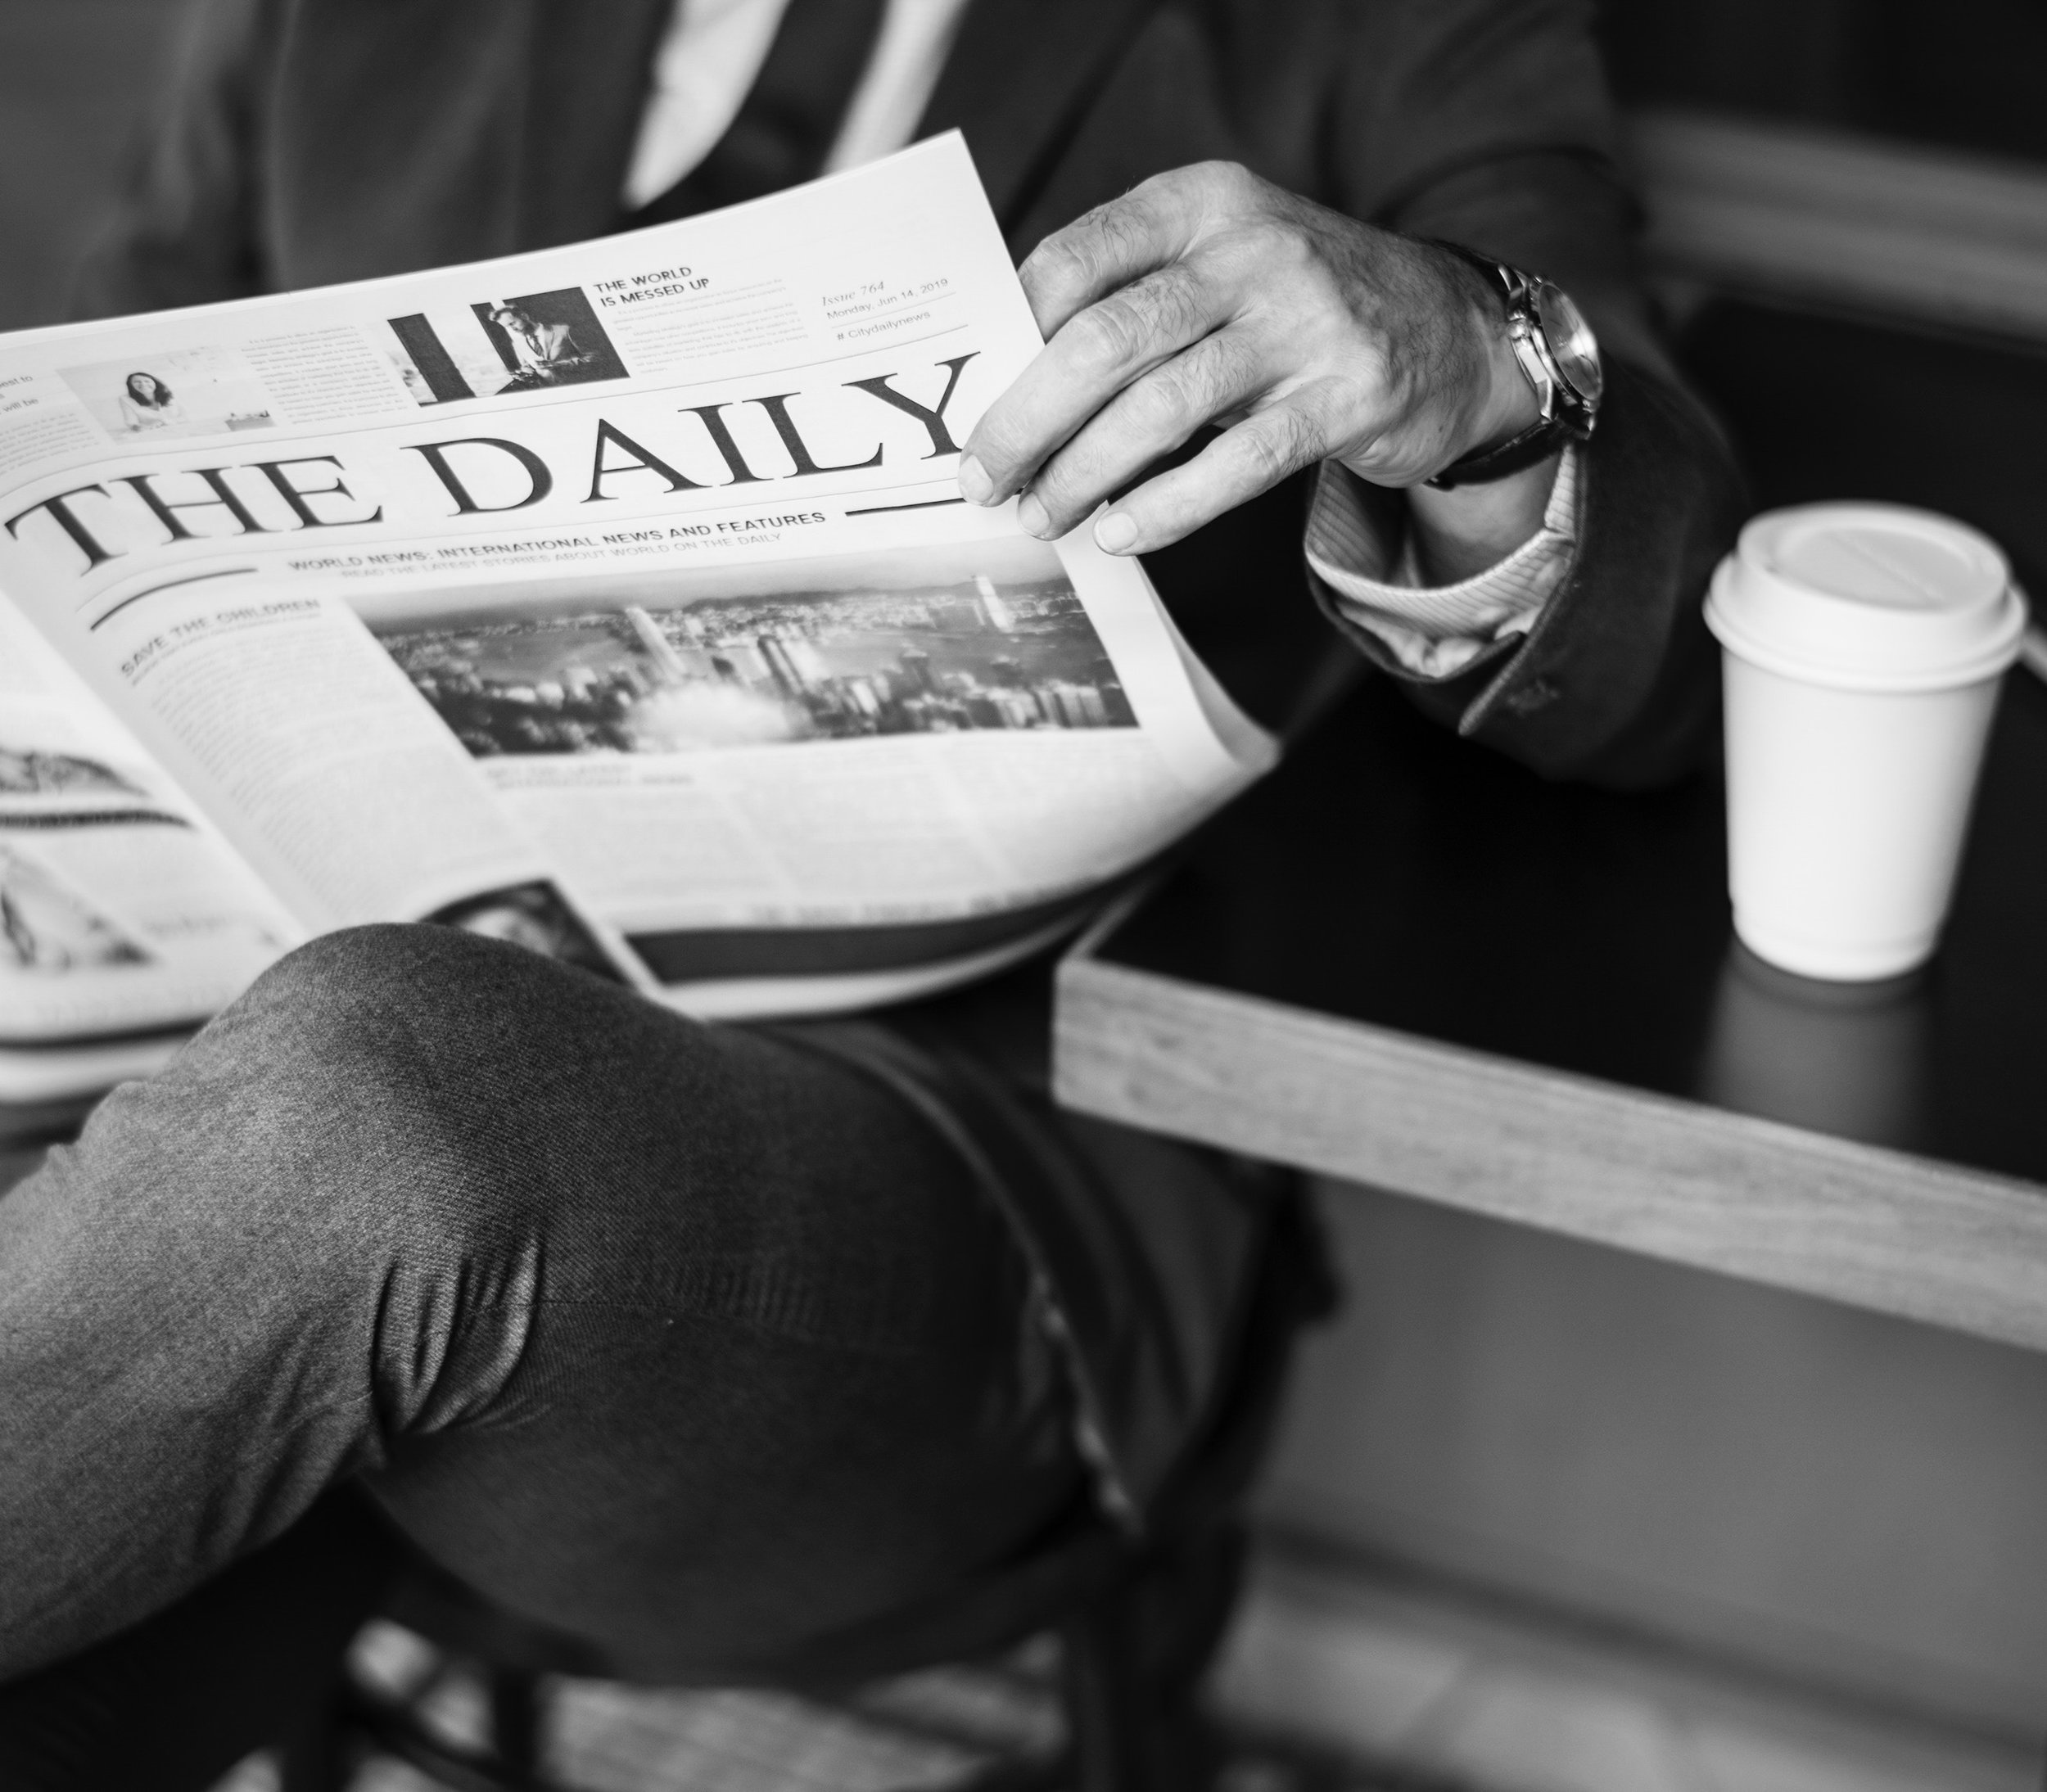 A man sits on a bench reading a newspaper with a cup of coffee beside him.